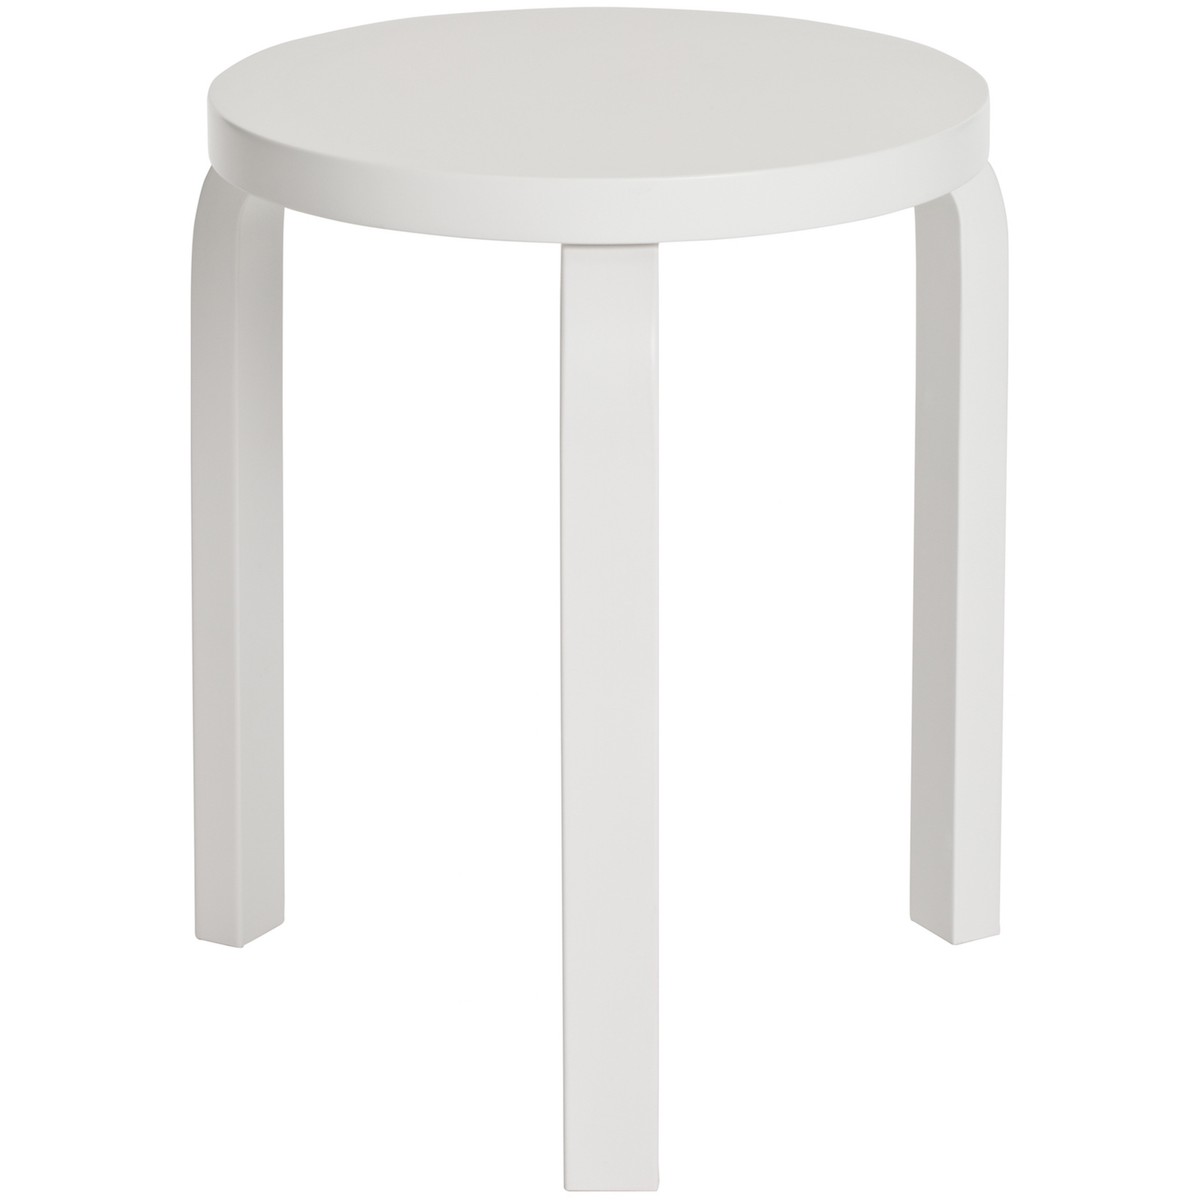 white lacquered - Stool 60 - classic edition